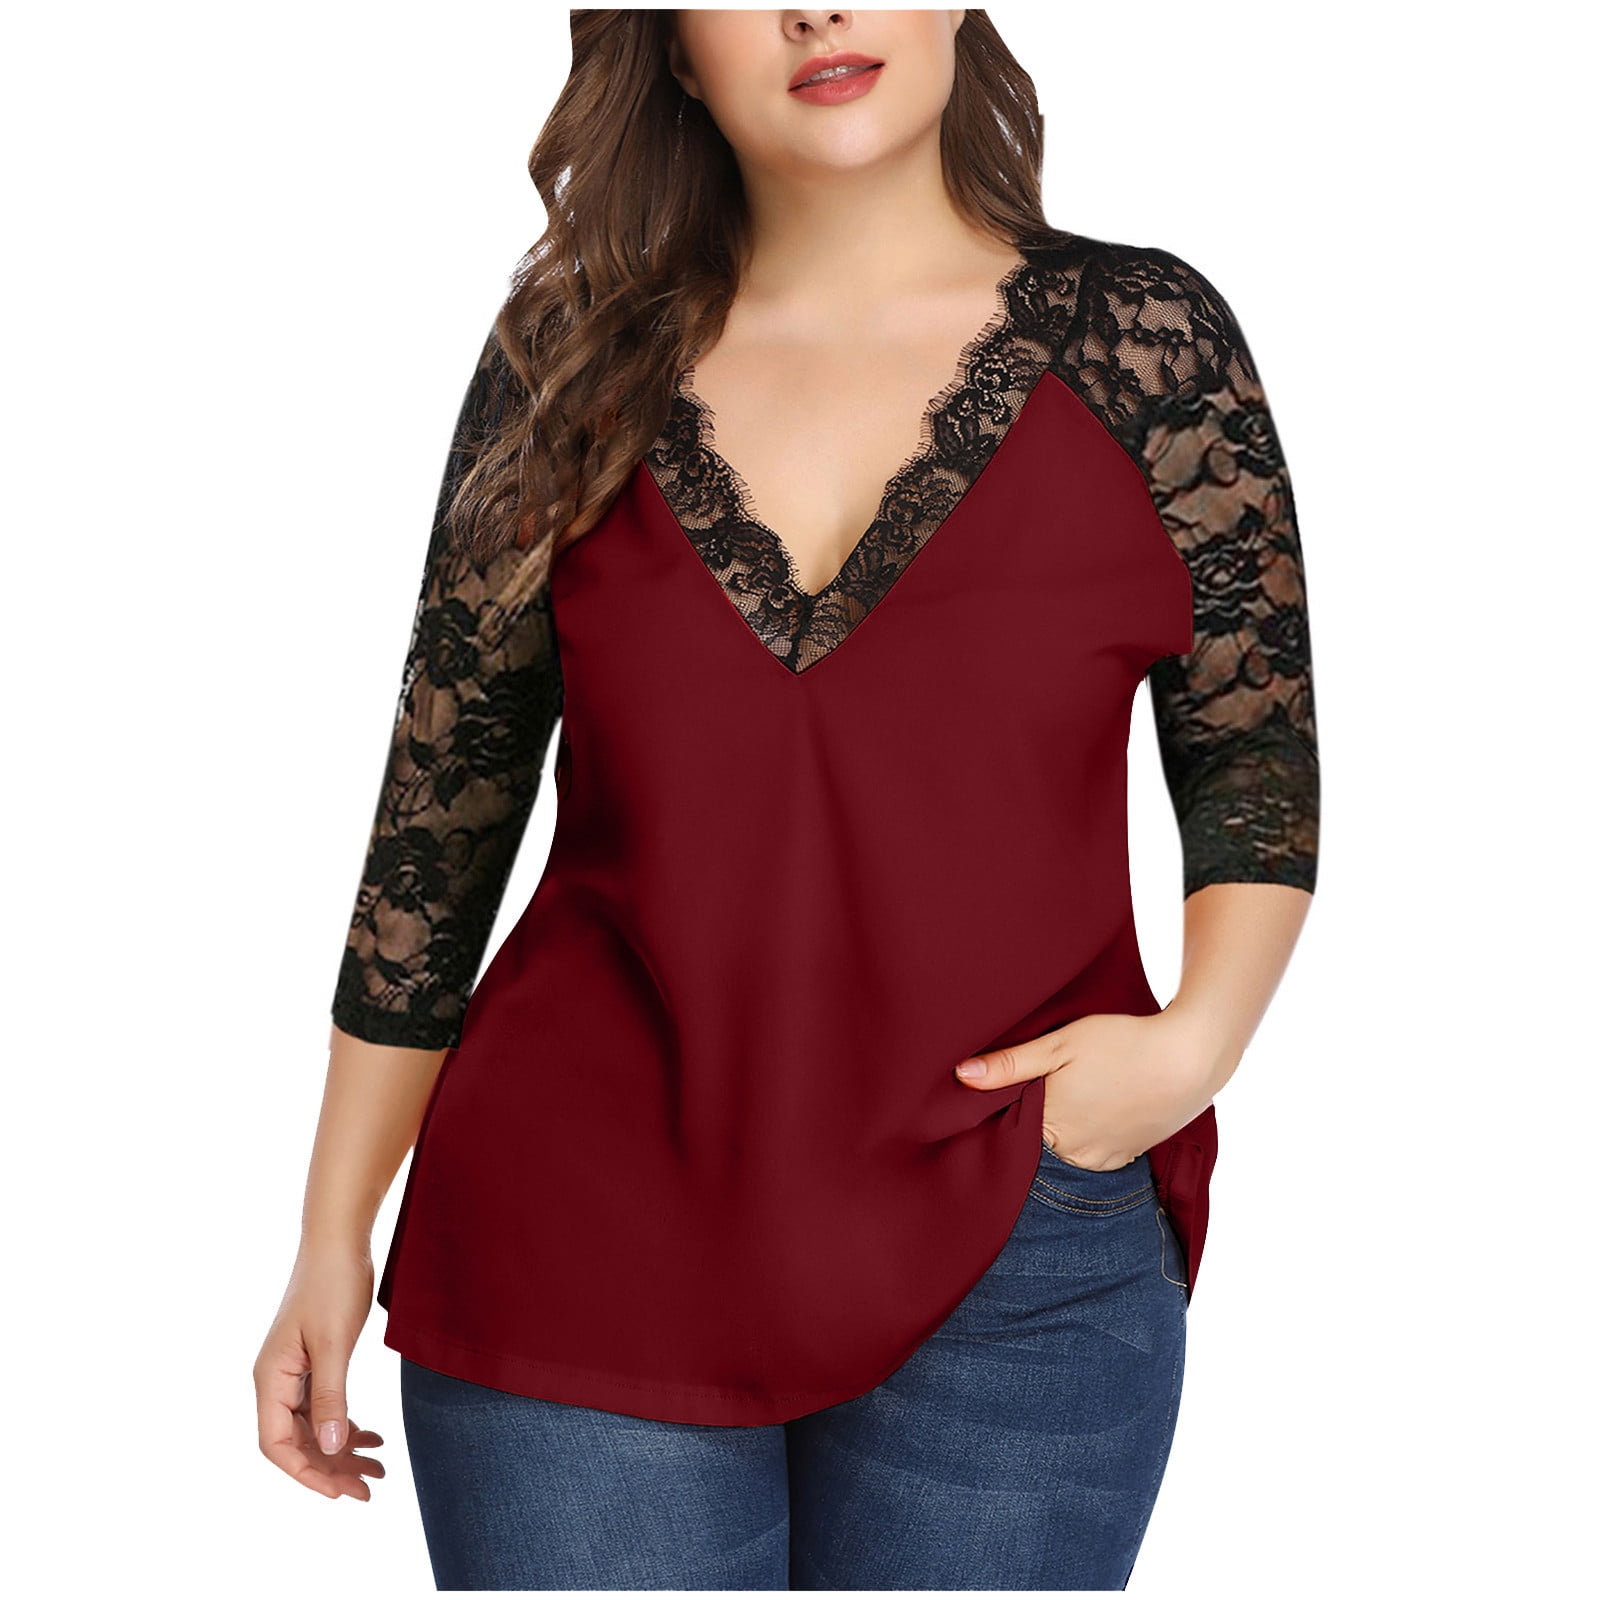 OKBOP Work Tops for Women,Plus Size Casual Long Sleeve Solid Lace V-Neck  Splicing T-Shirt Net Yarn Women Blouses And Tops Fashion Christmas Shirts  for Women 